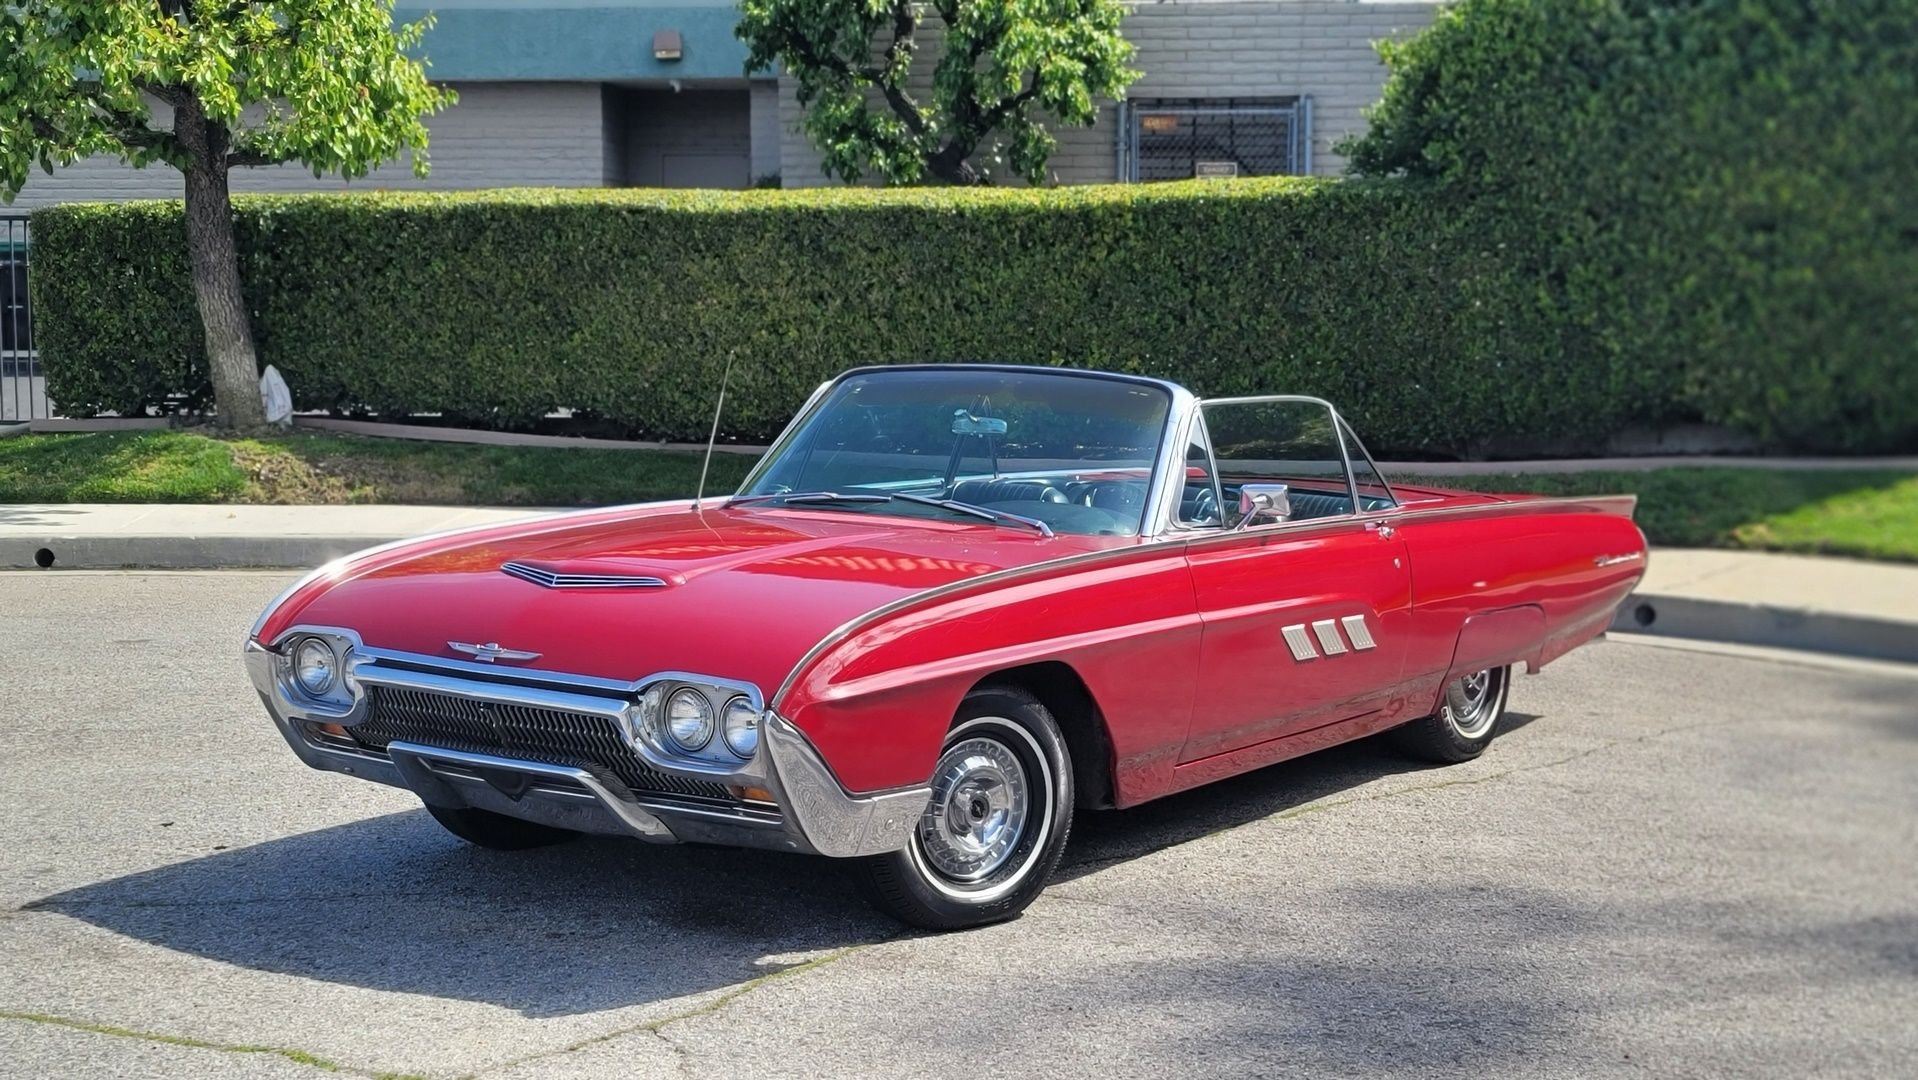 1963 Ford Thunderbird Convertible Classic And Collector Cars